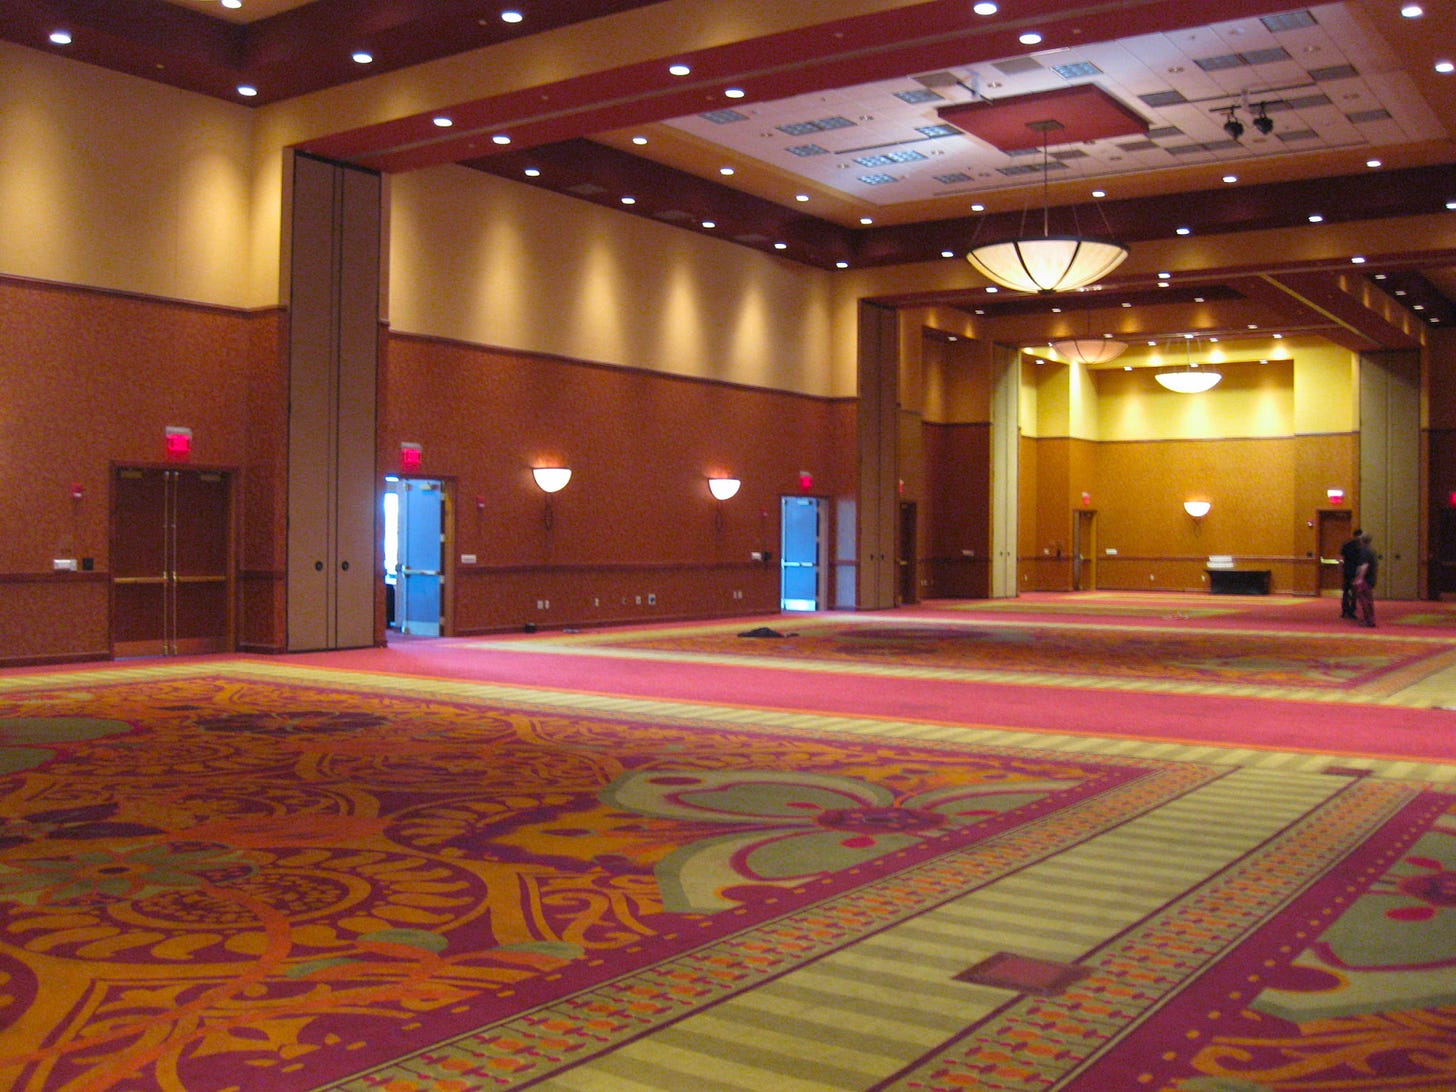 uninspired conference ballroom with no windows and a large pattern red and gold rug.